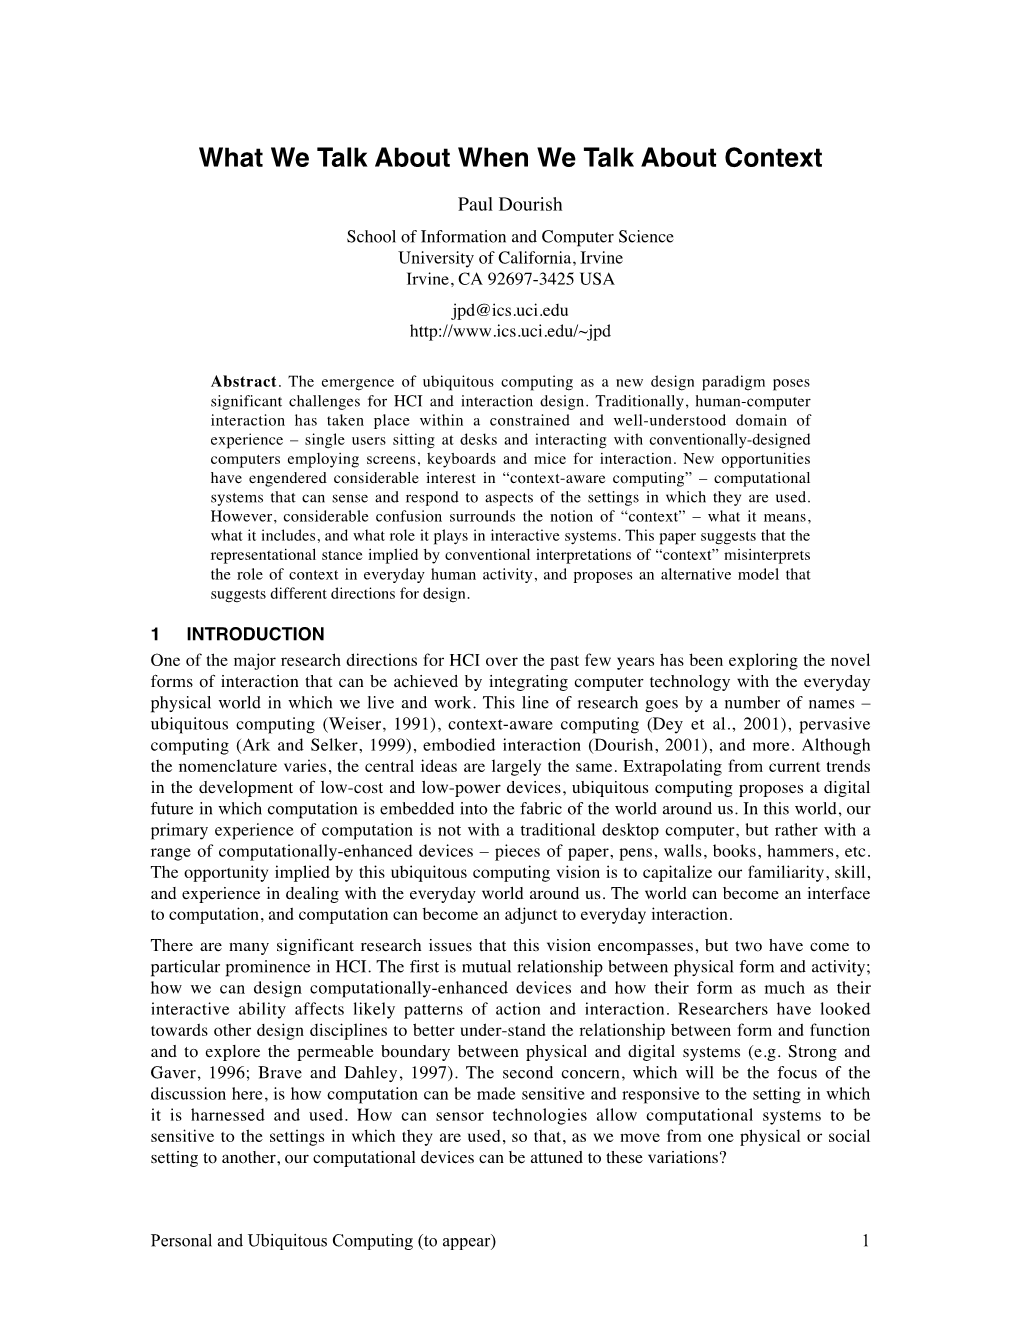 What We Talk About When We Talk About Context